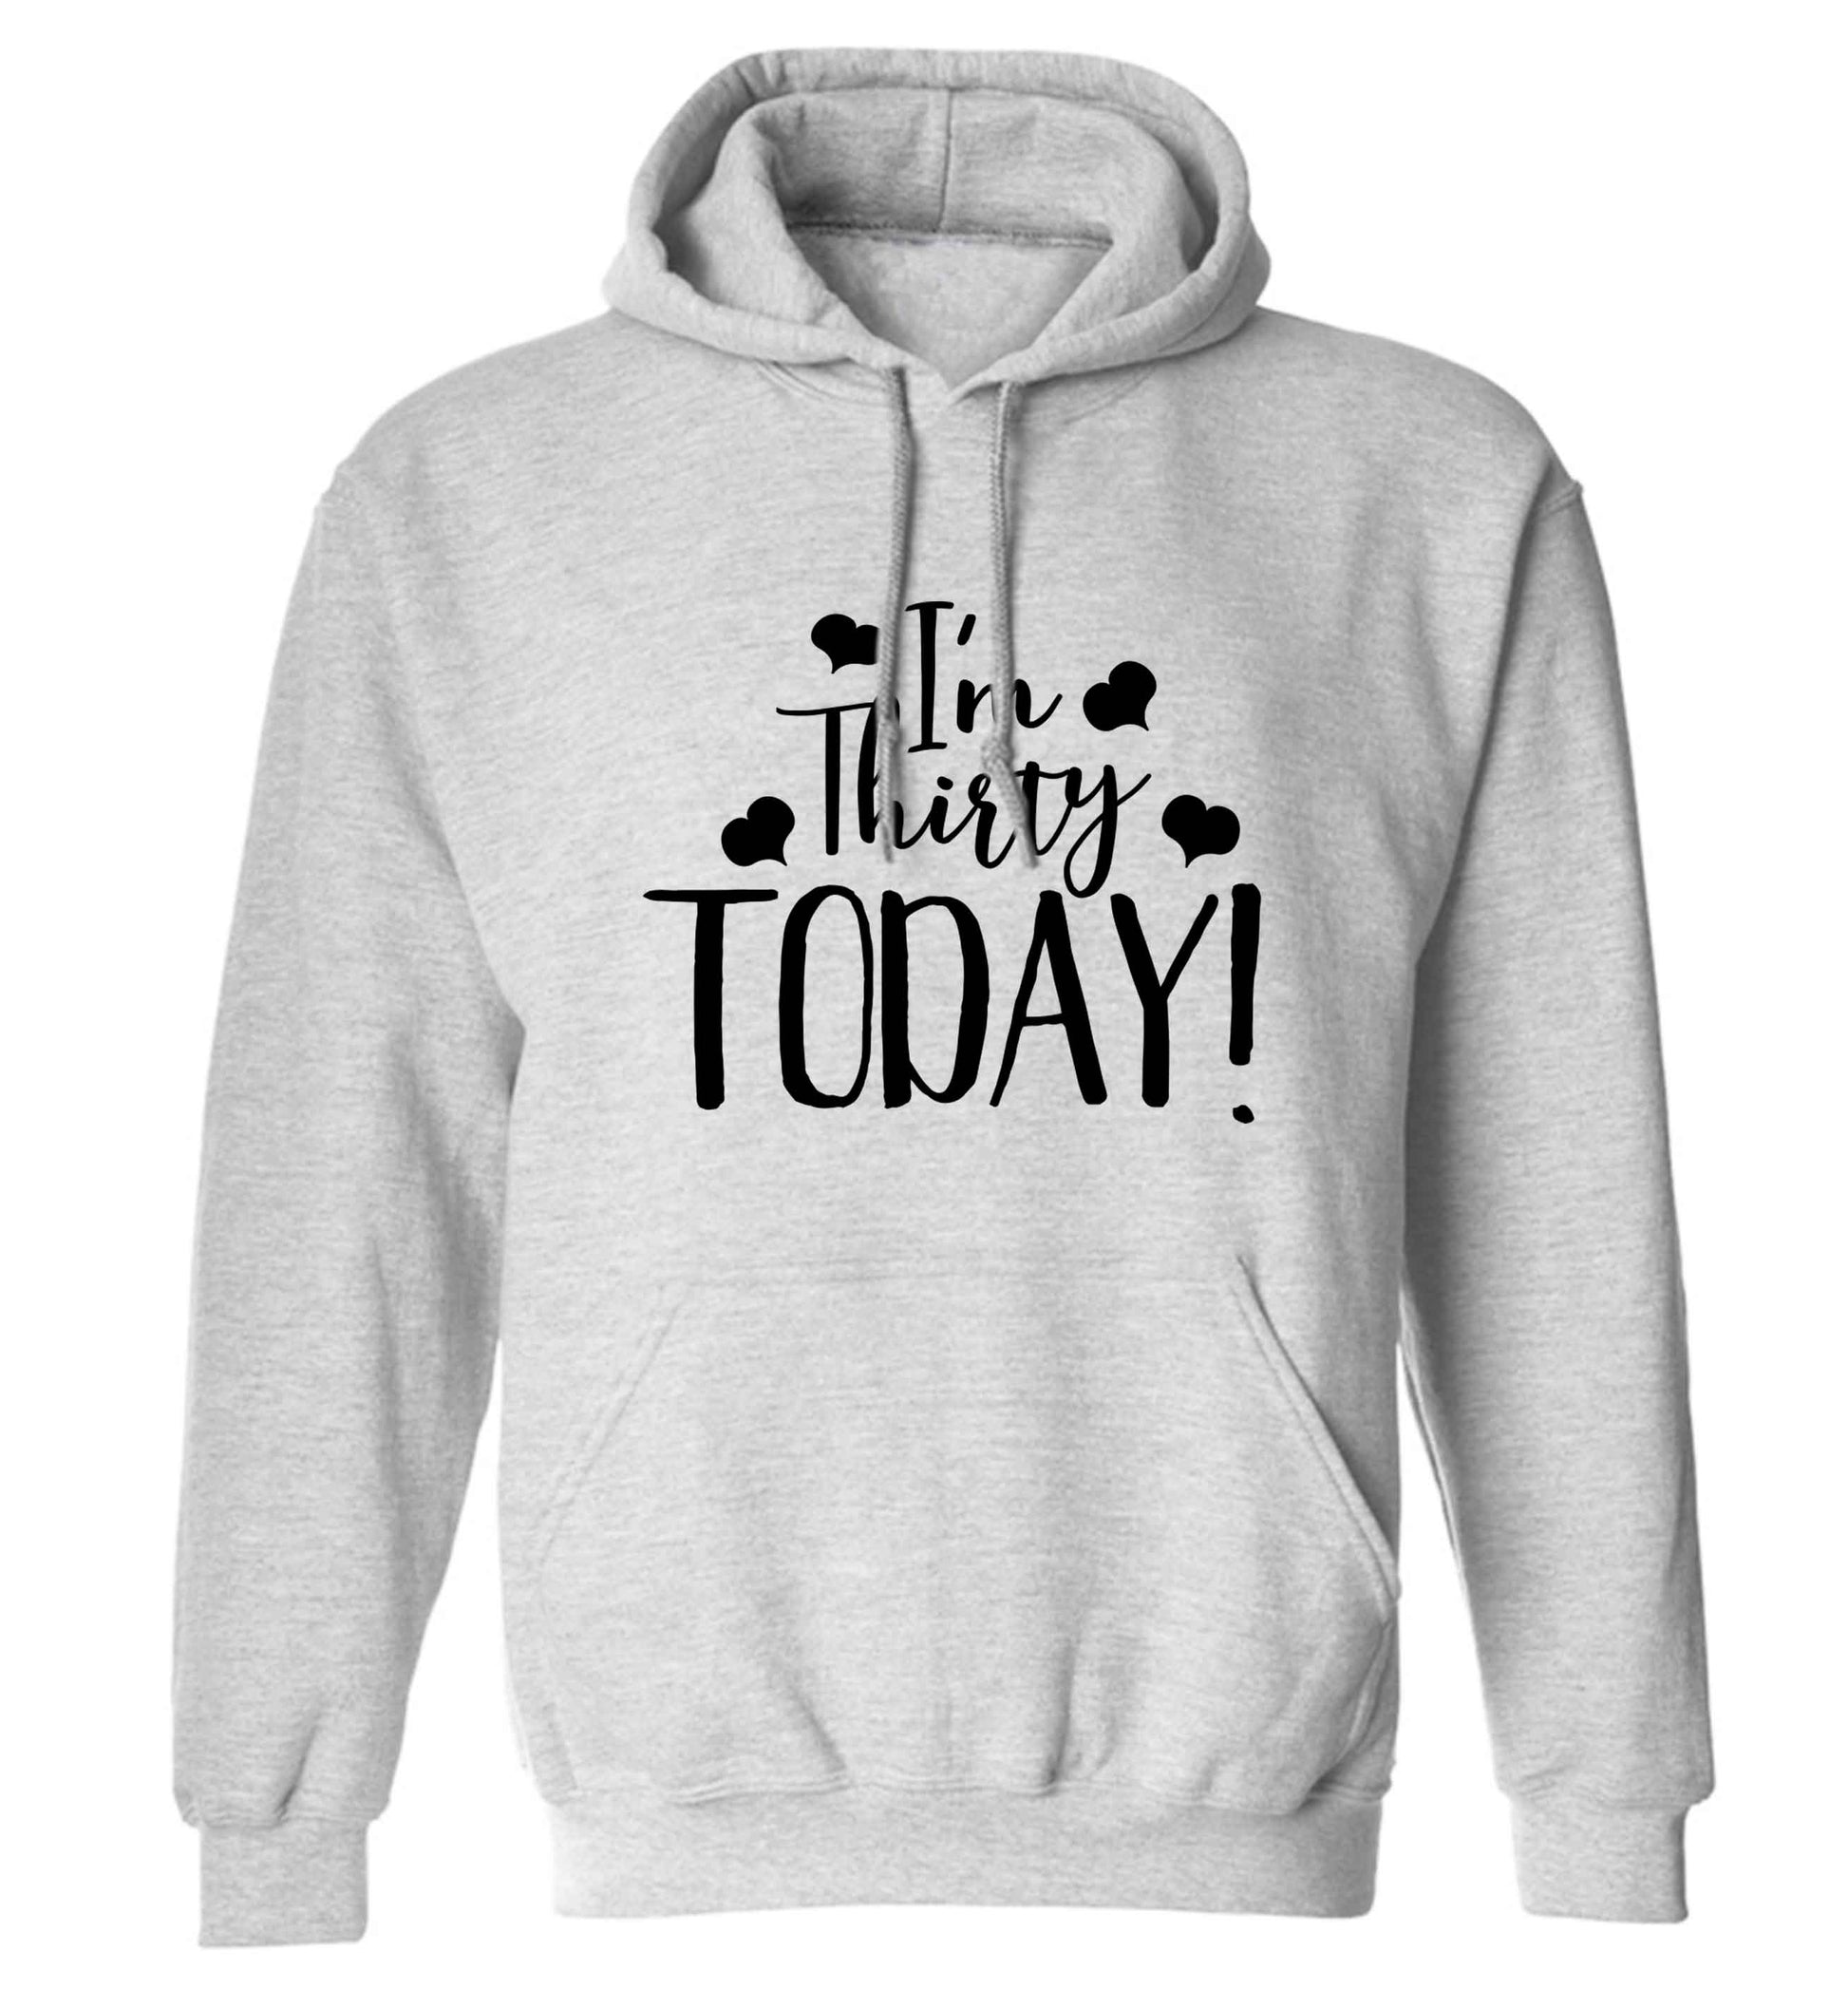 I'm thirty today! adults unisex grey hoodie 2XL